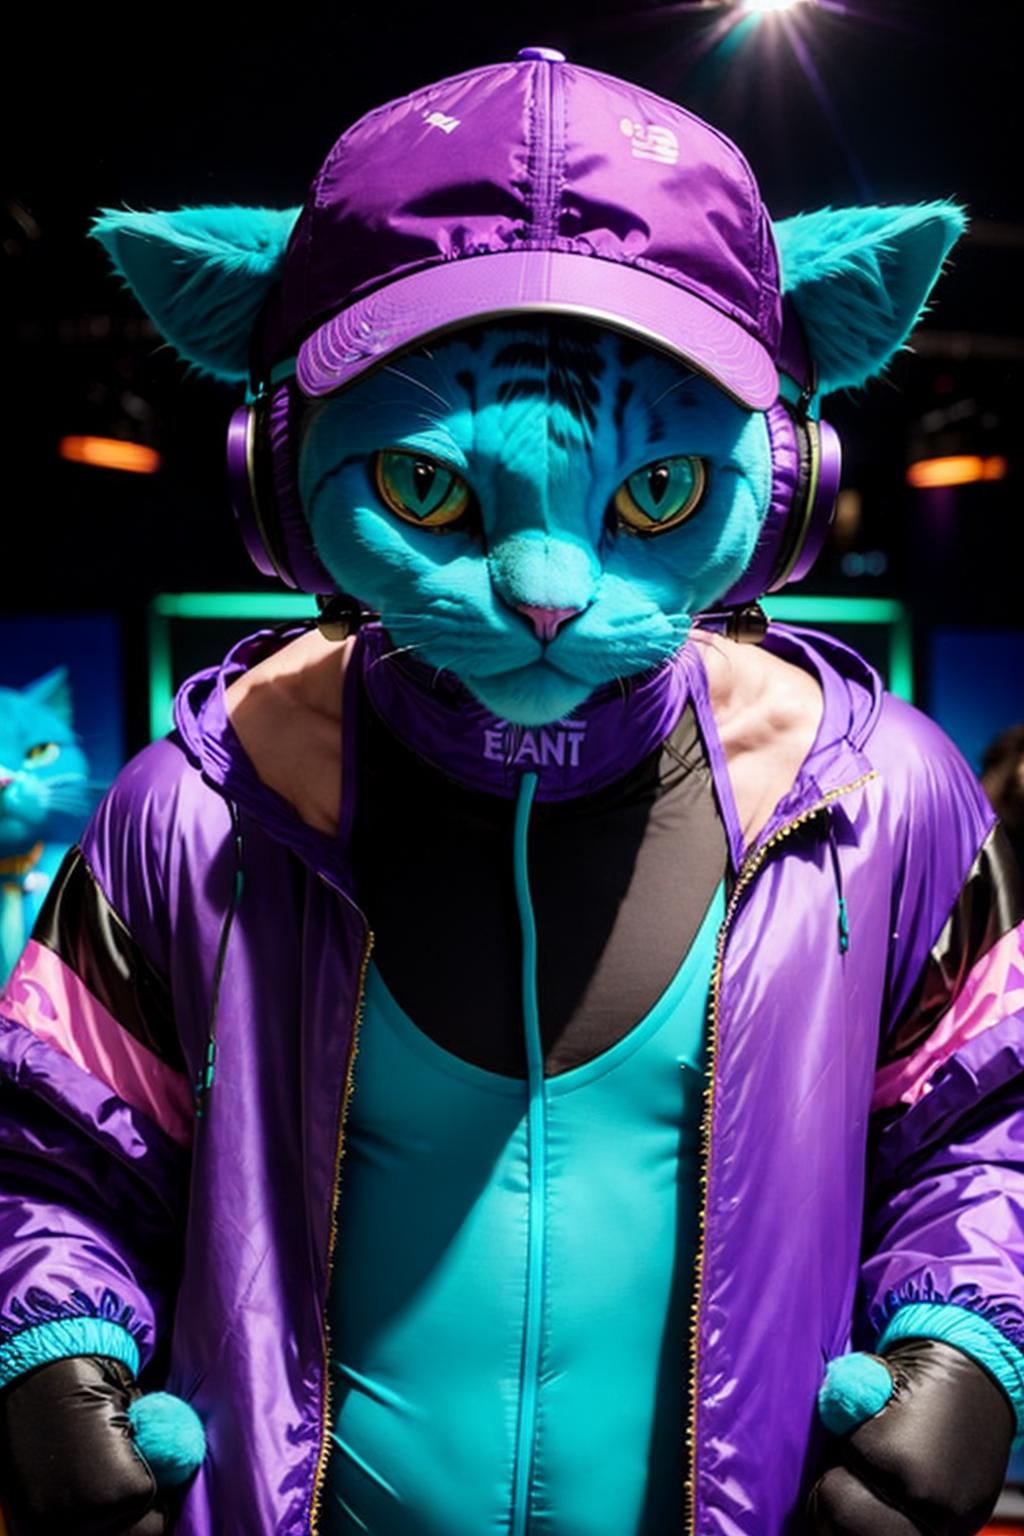 A person wearing a purple jacket with a blue cat head and cat ears, holding a pair of headphones.